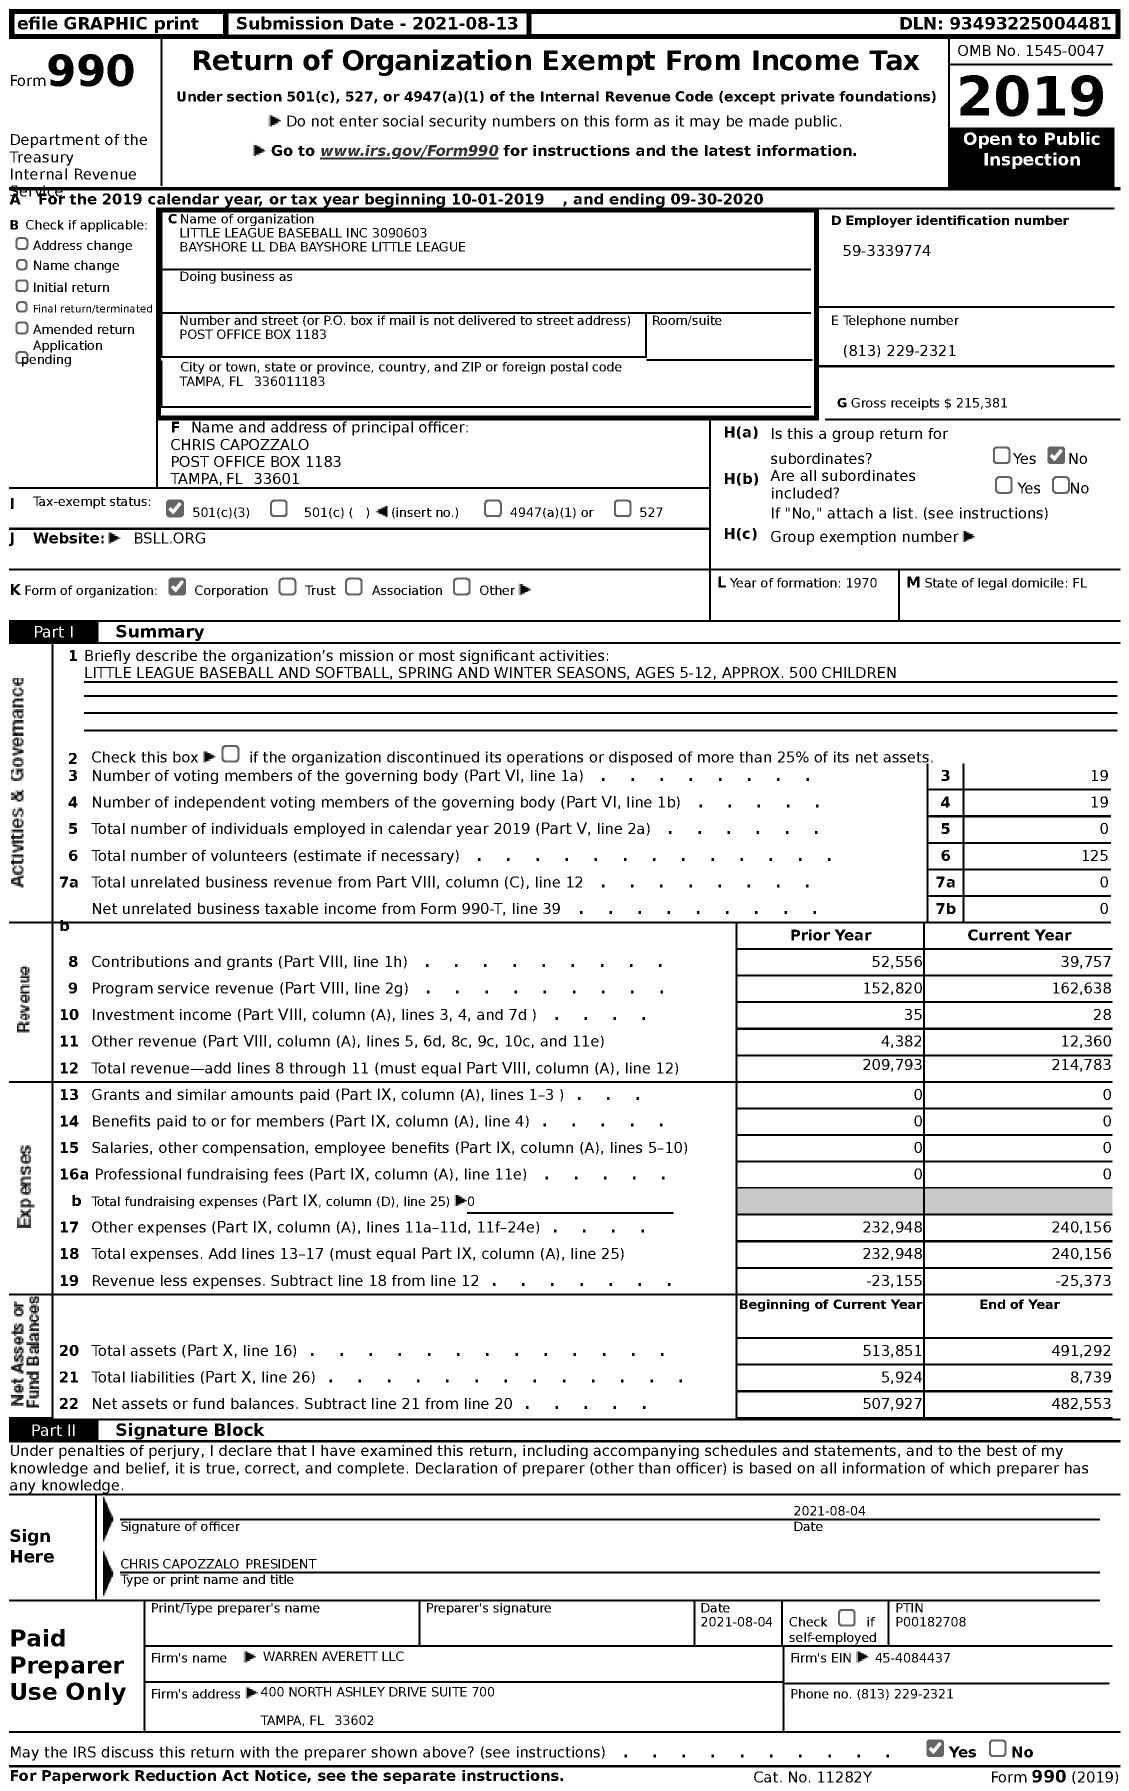 Image of first page of 2019 Form 990 for Little League Baseball - 3090603 Bayshore LL